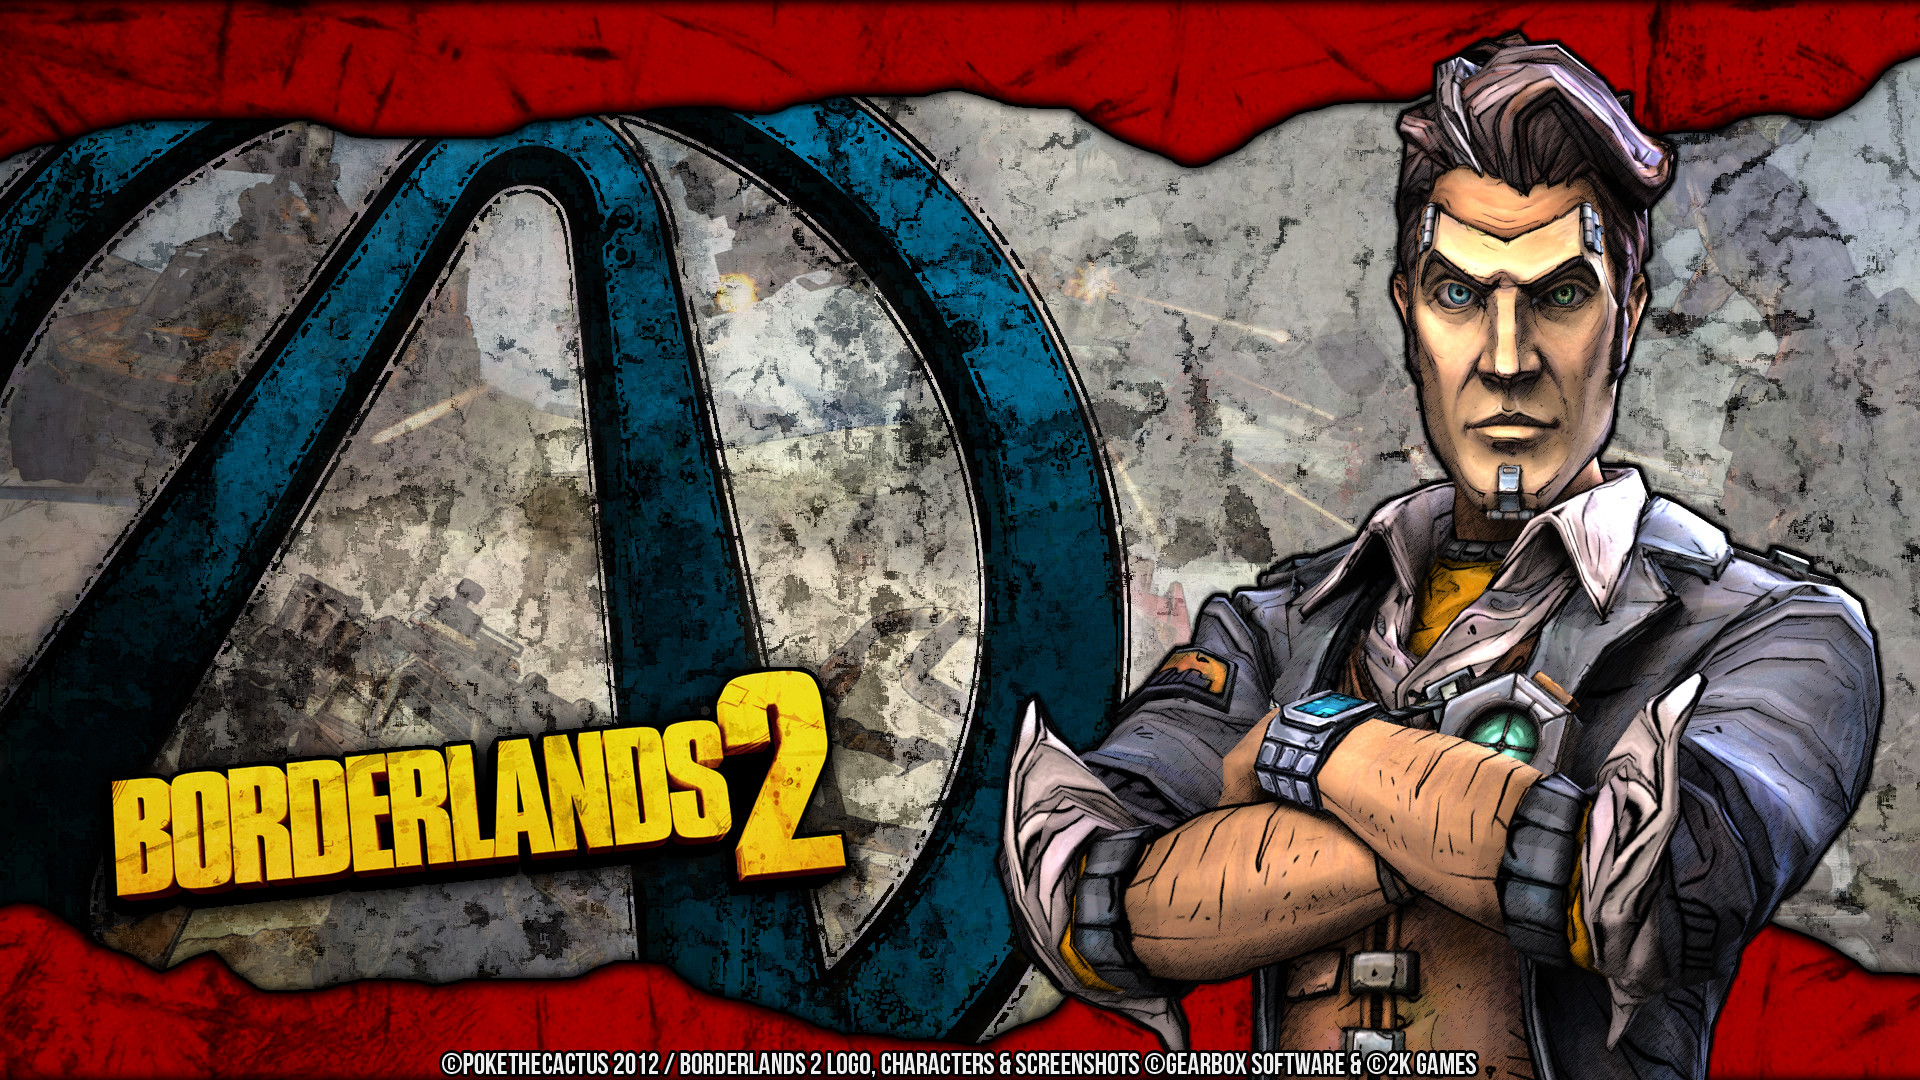 1920x1080 ... Wallpaper by PokeTheCactus on DeviantArt Comic books, movies, games  blog everything related to fiction ... Borderlands 2 ...